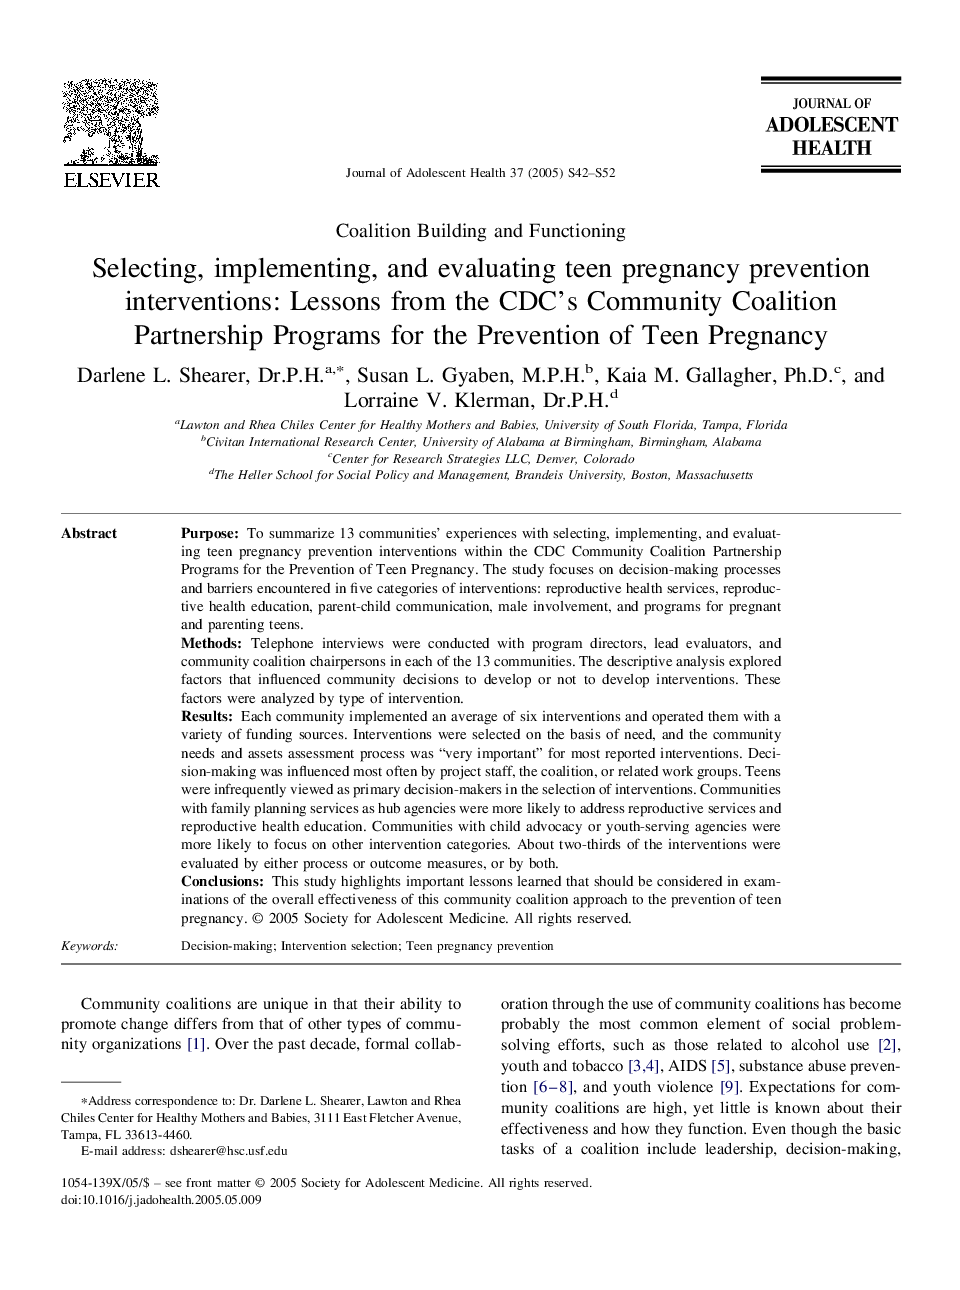 Selecting, implementing, and evaluating teen pregnancy prevention interventions: Lessons from the CDC's Community Coalition Partnership Programs for the Prevention of Teen Pregnancy